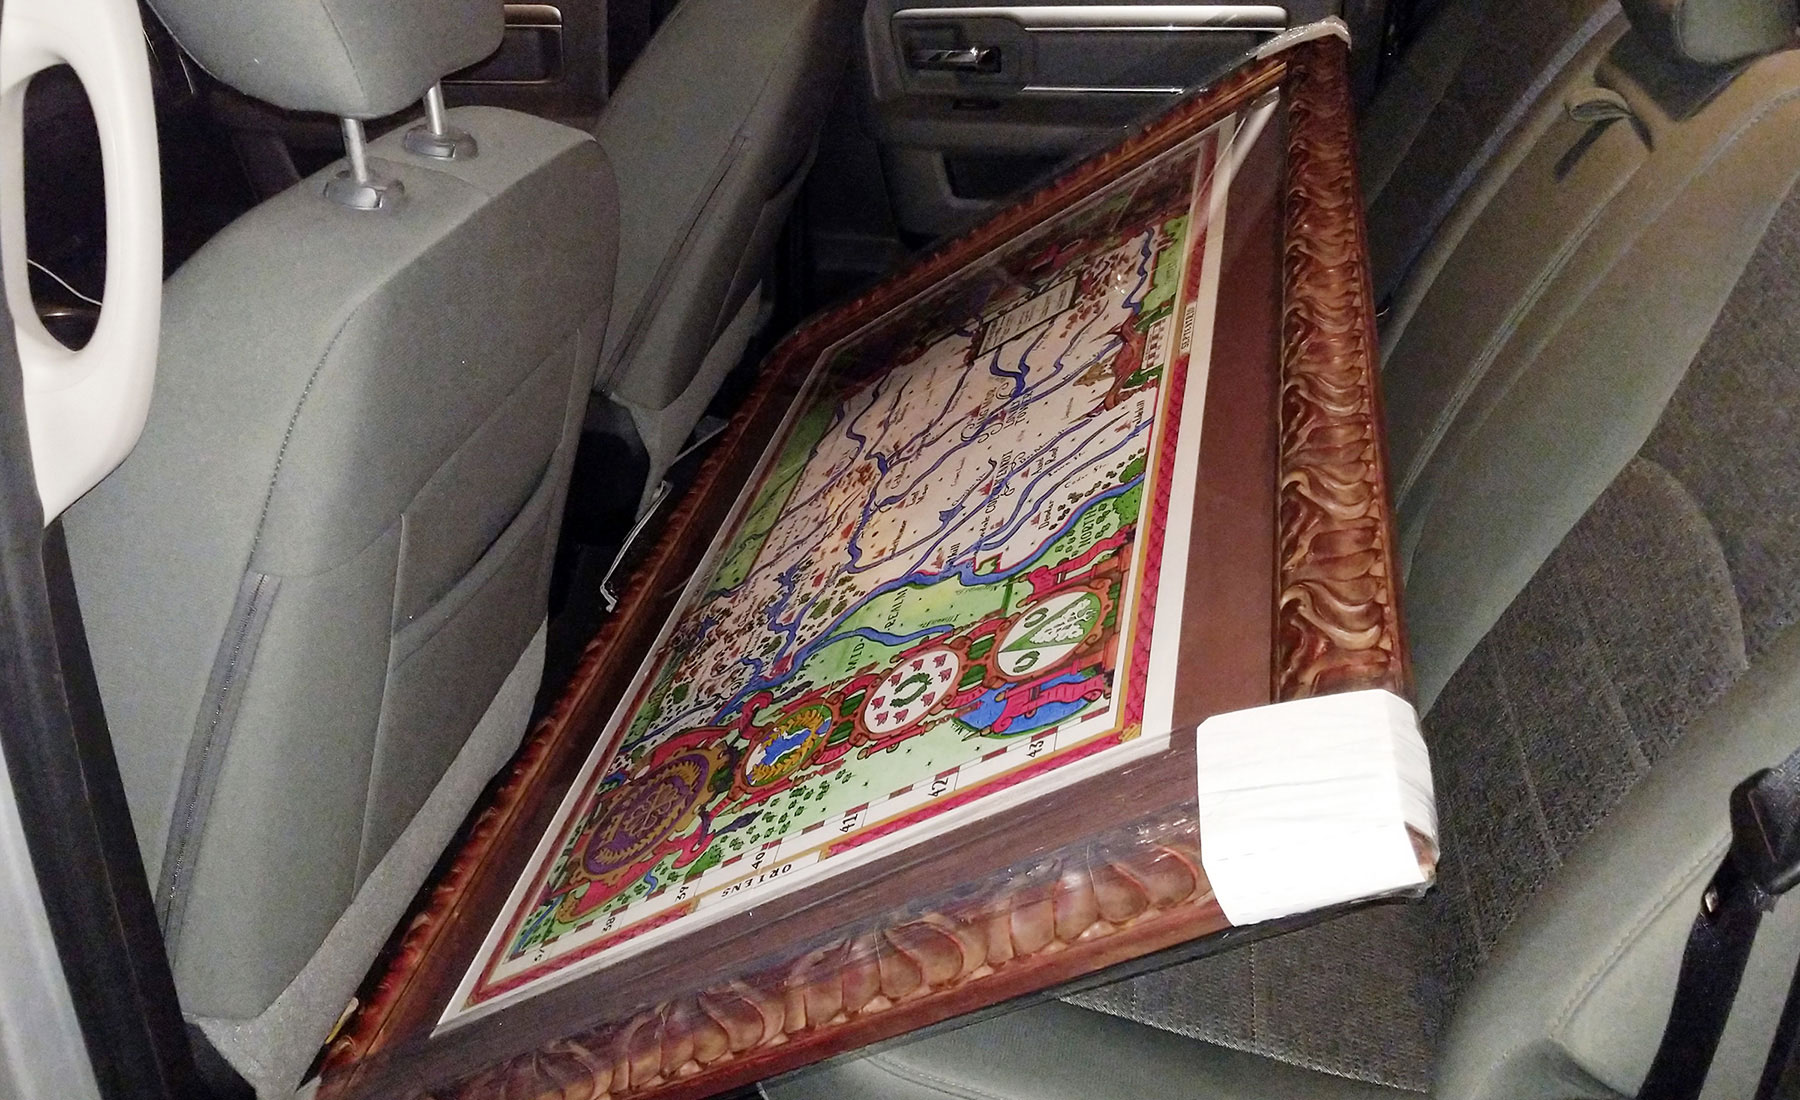 Fit of the framed map in the back row of the truck